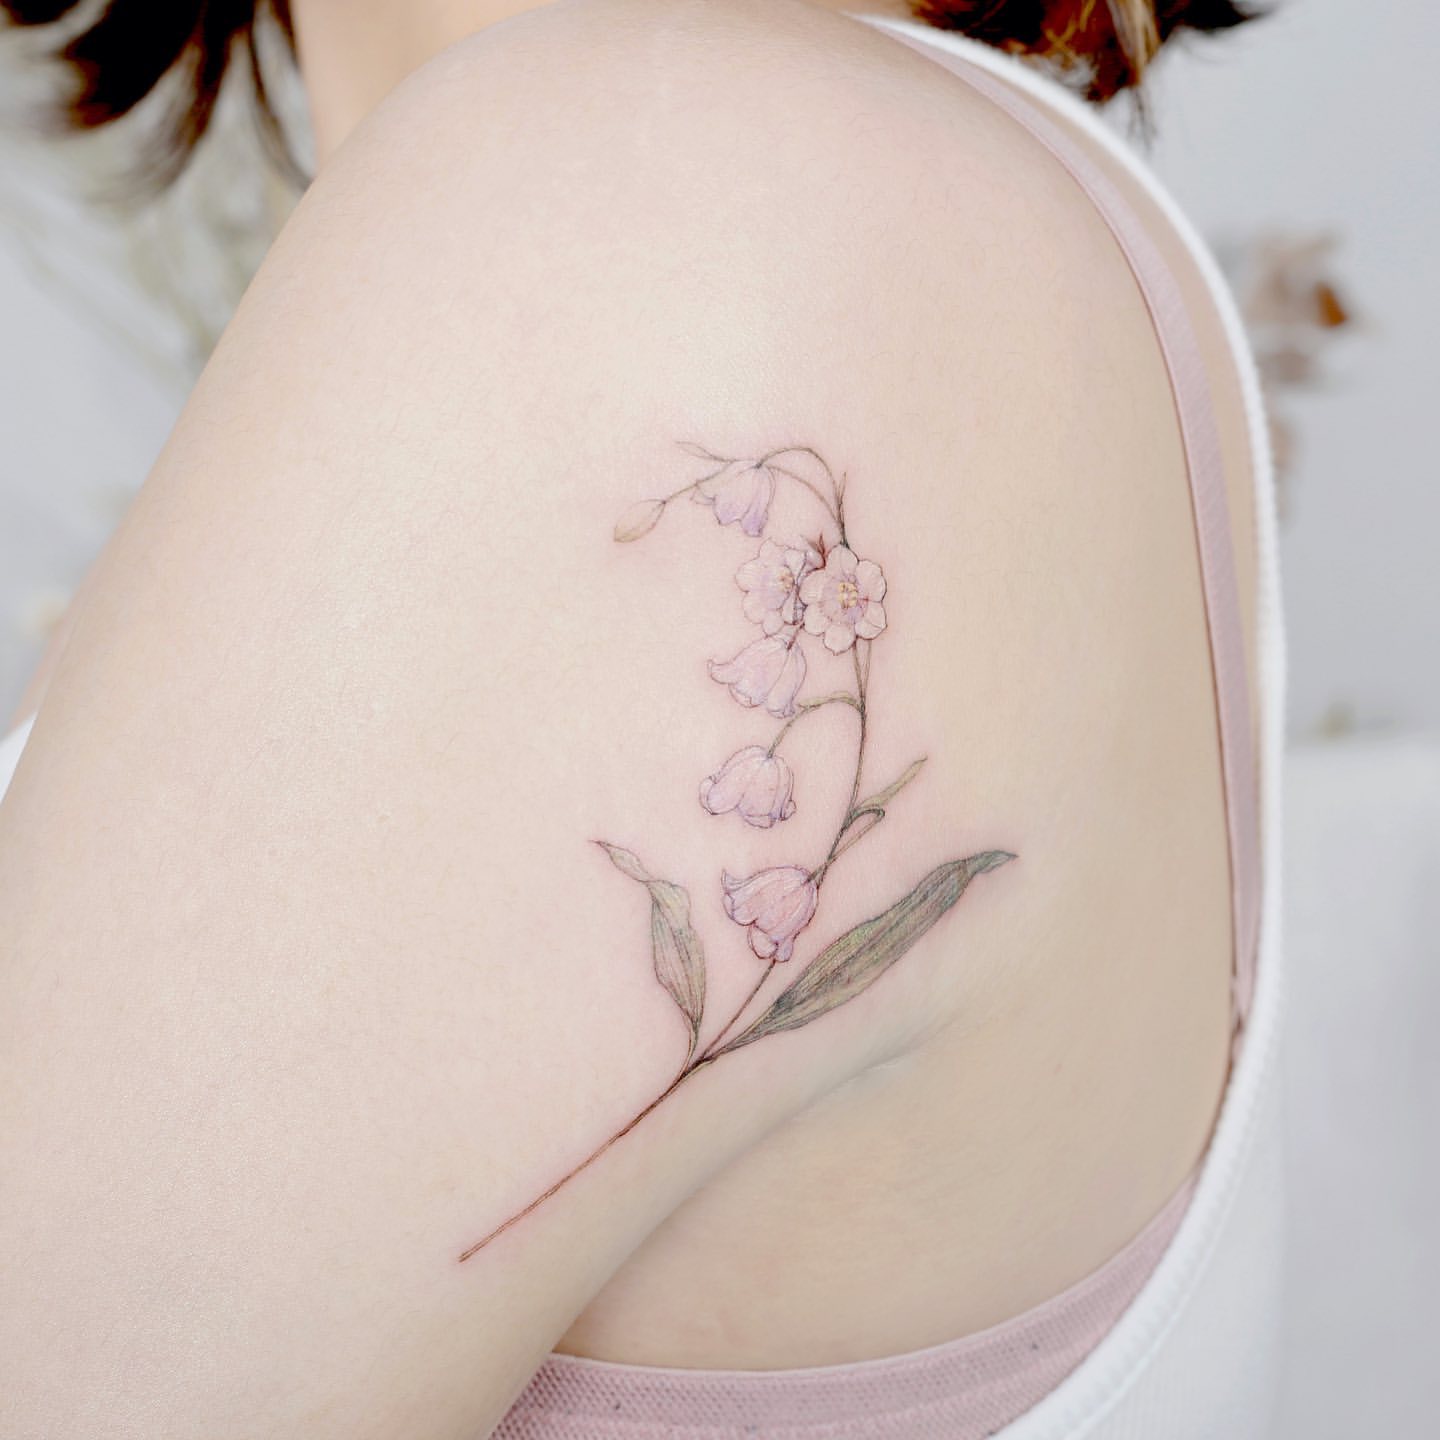 Lily Of The Valley Tattoo Ideas 17